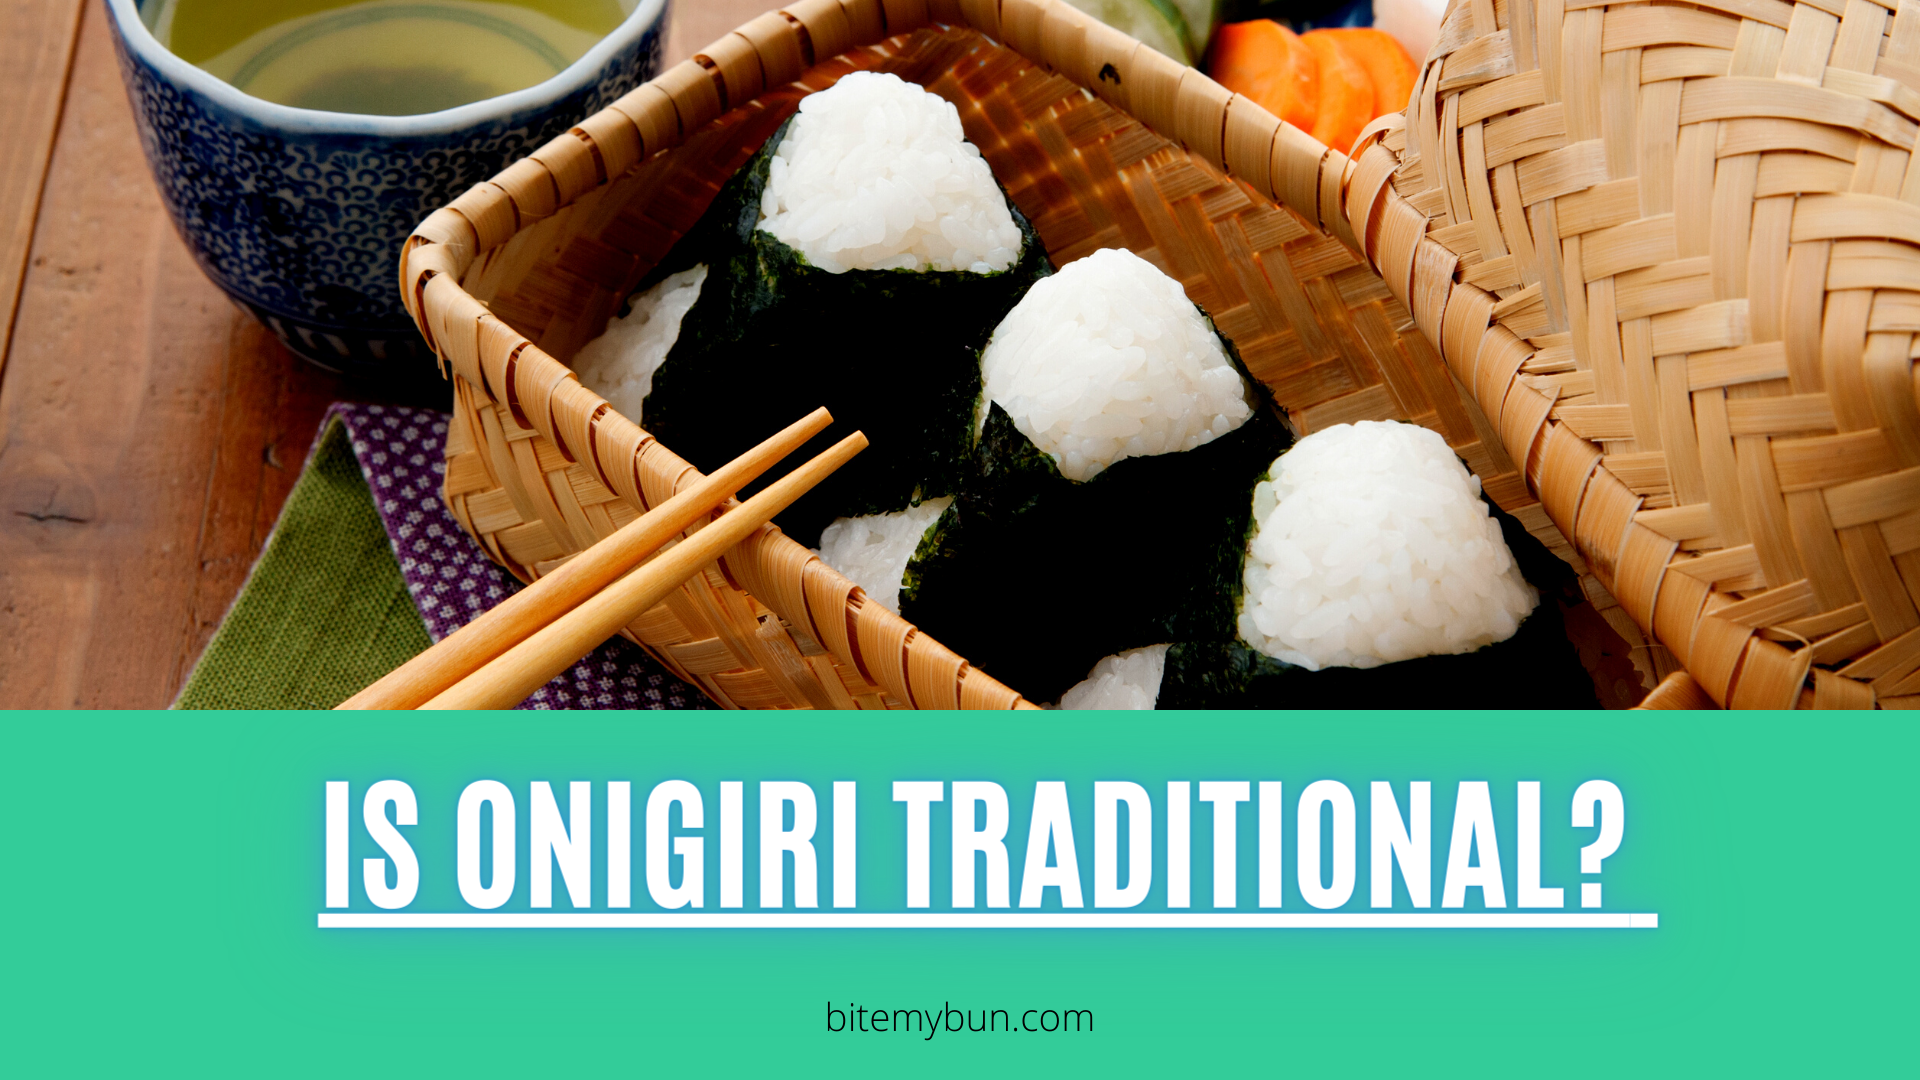 Is onigiri traditional? Origins of these delicious Japanese rice balls